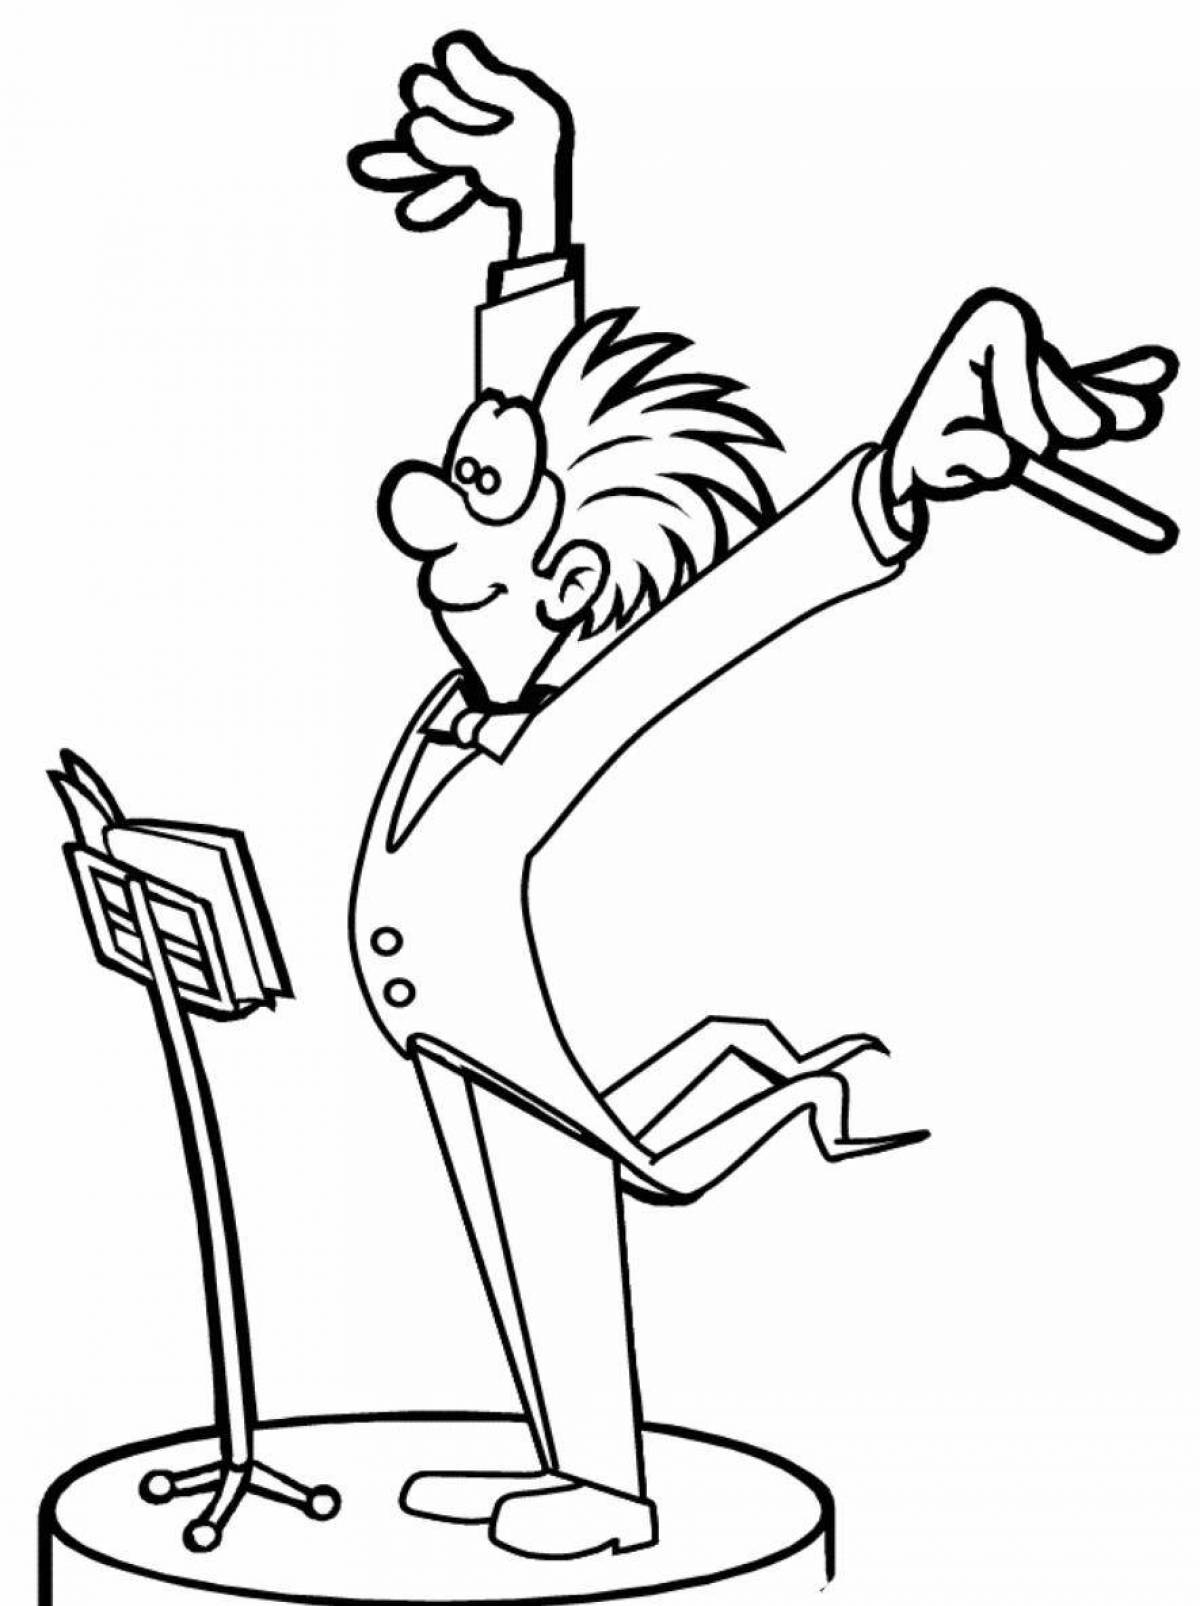 Exquisite conductor coloring page